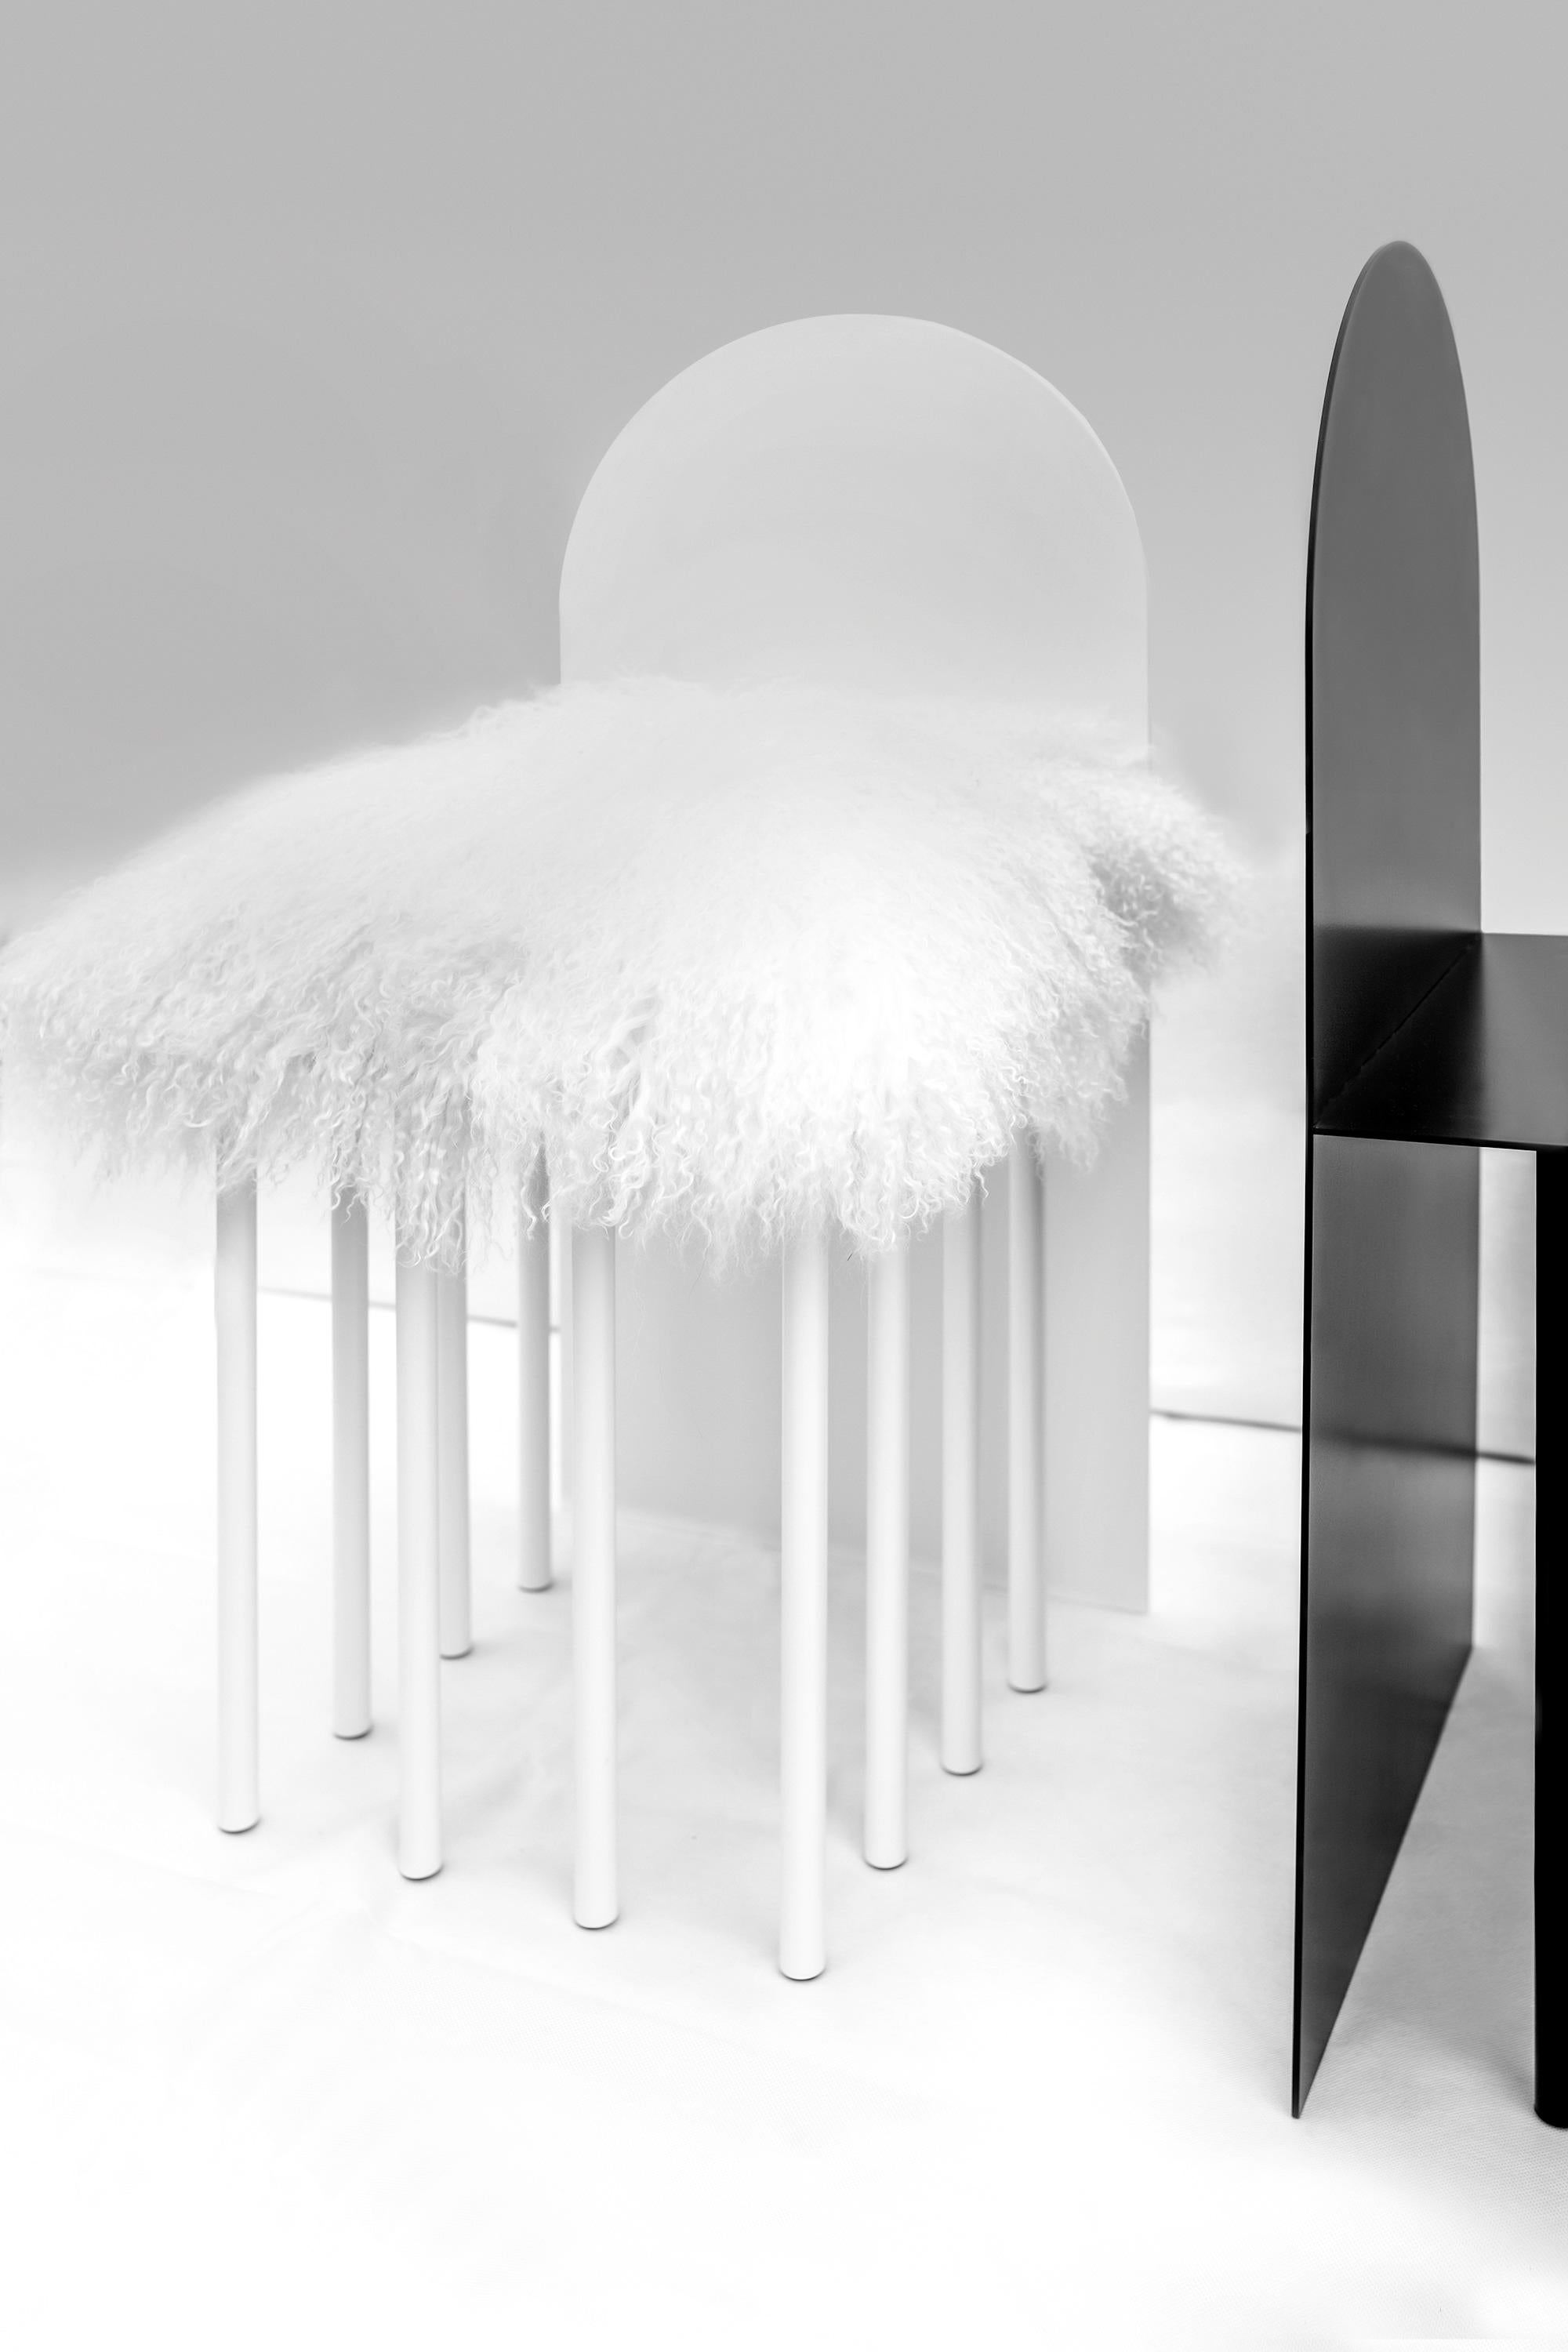 Design chair realized in metal with a white or black coloured structure completely hand-crafted by artisan and carachterized by the iconic arch shape.
This beautiful Mongolia chairs are a game of essential shapes.
The particular real fur cushion